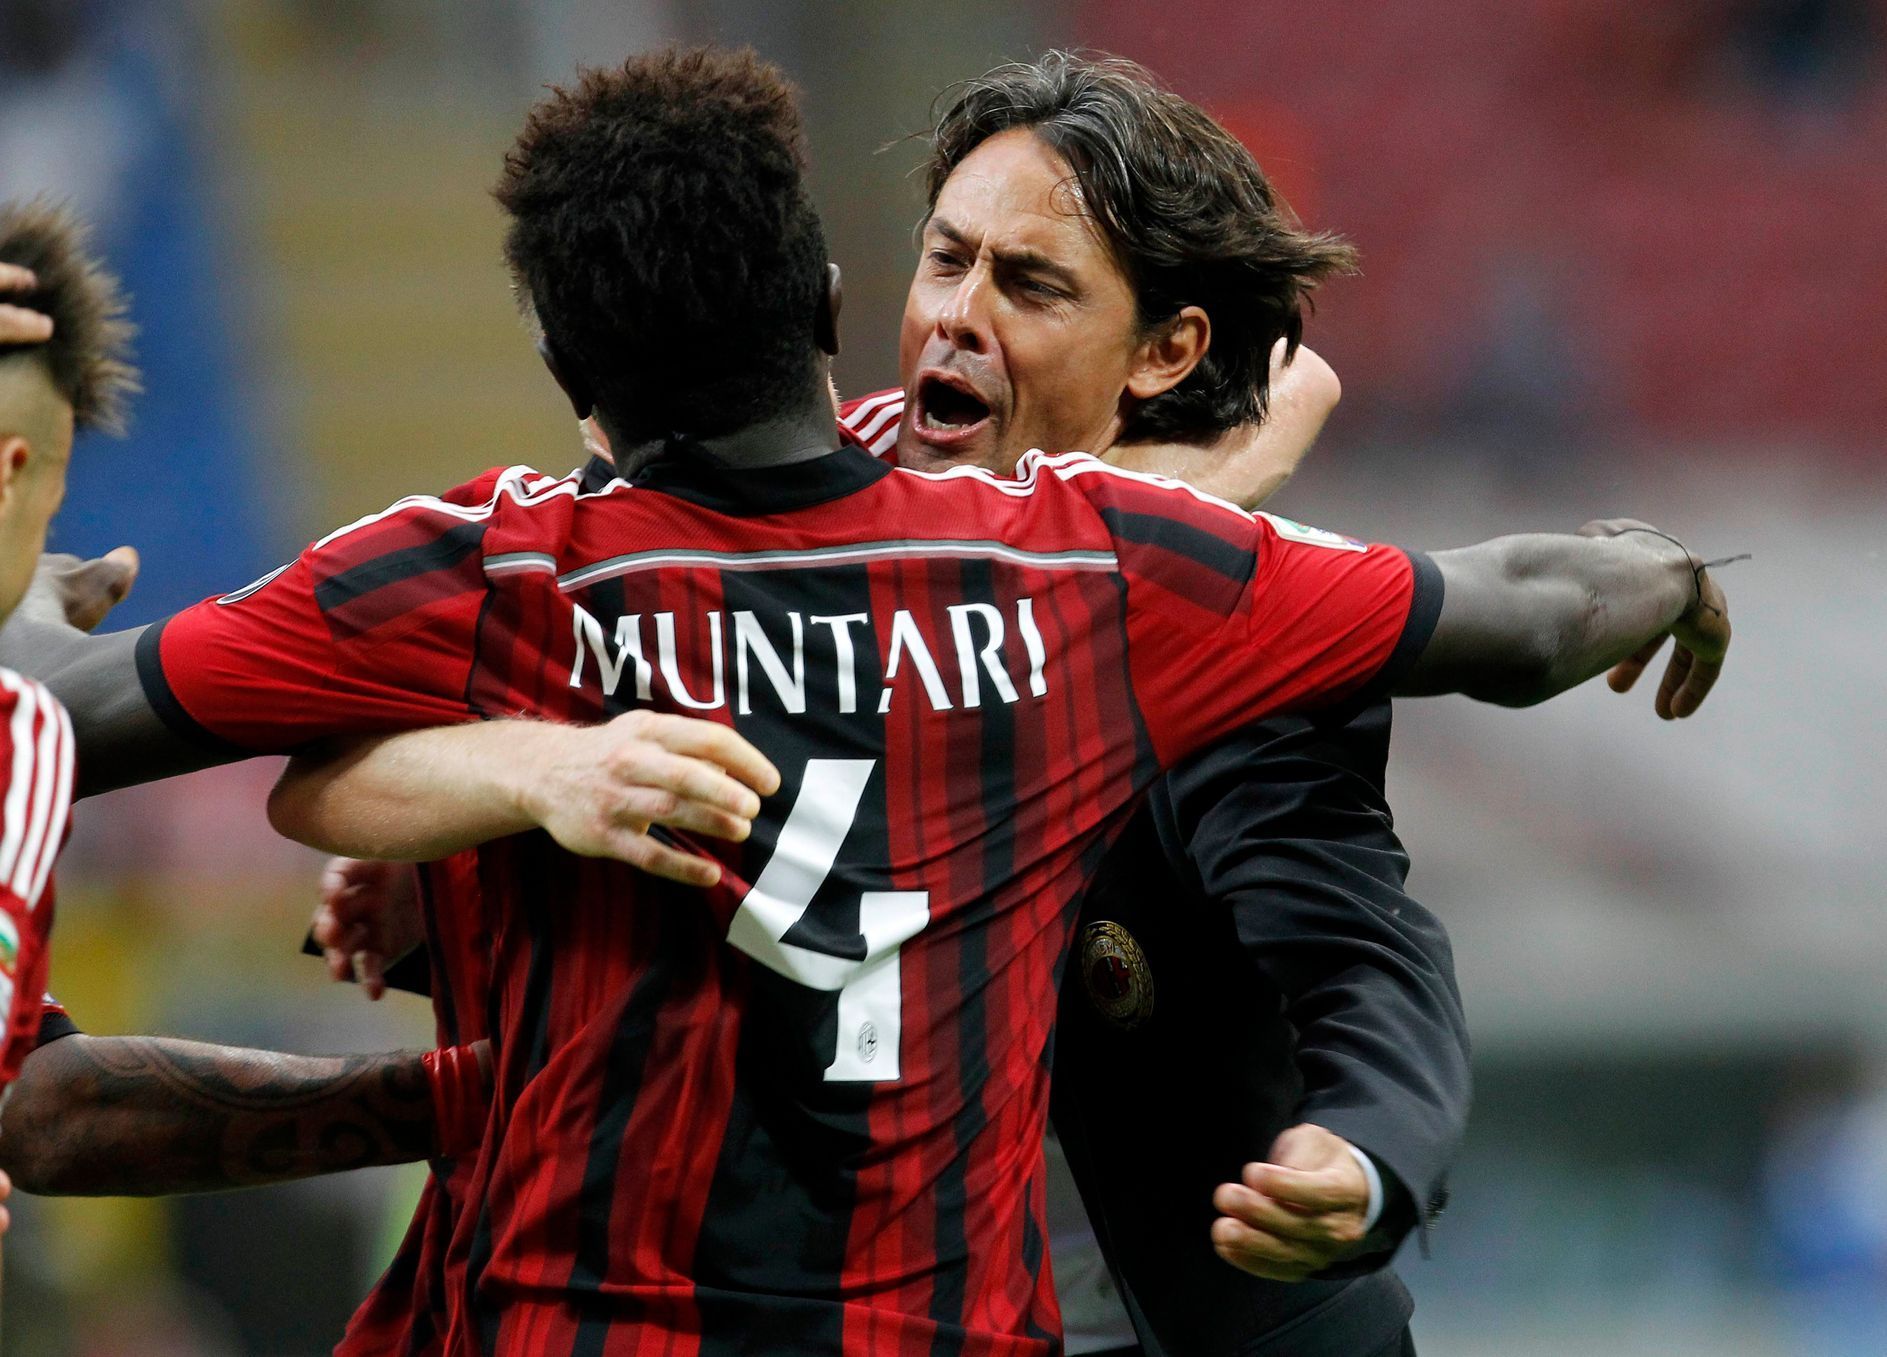 AC Milan's Muntari celebrates with his coach Inzaghi after scoring goal against Lazio  during their Italian Serie A match in Milan